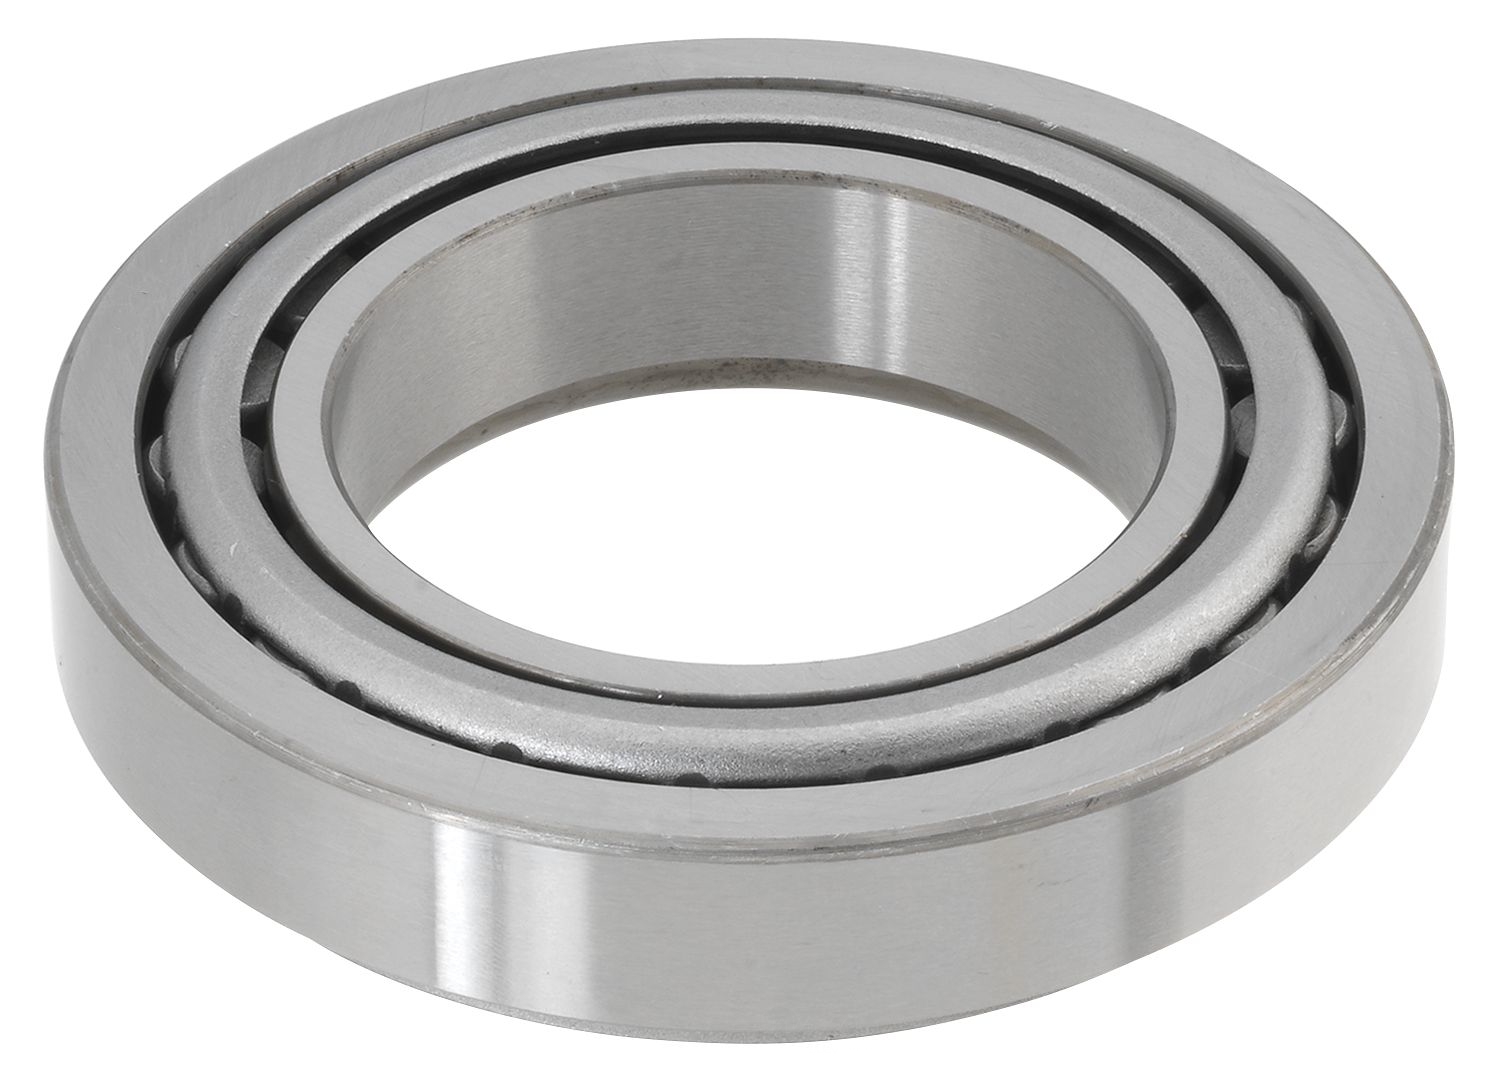 SKF (CHICAGO RAWHIDE) - Axle Differential Bearing - SKF BR101